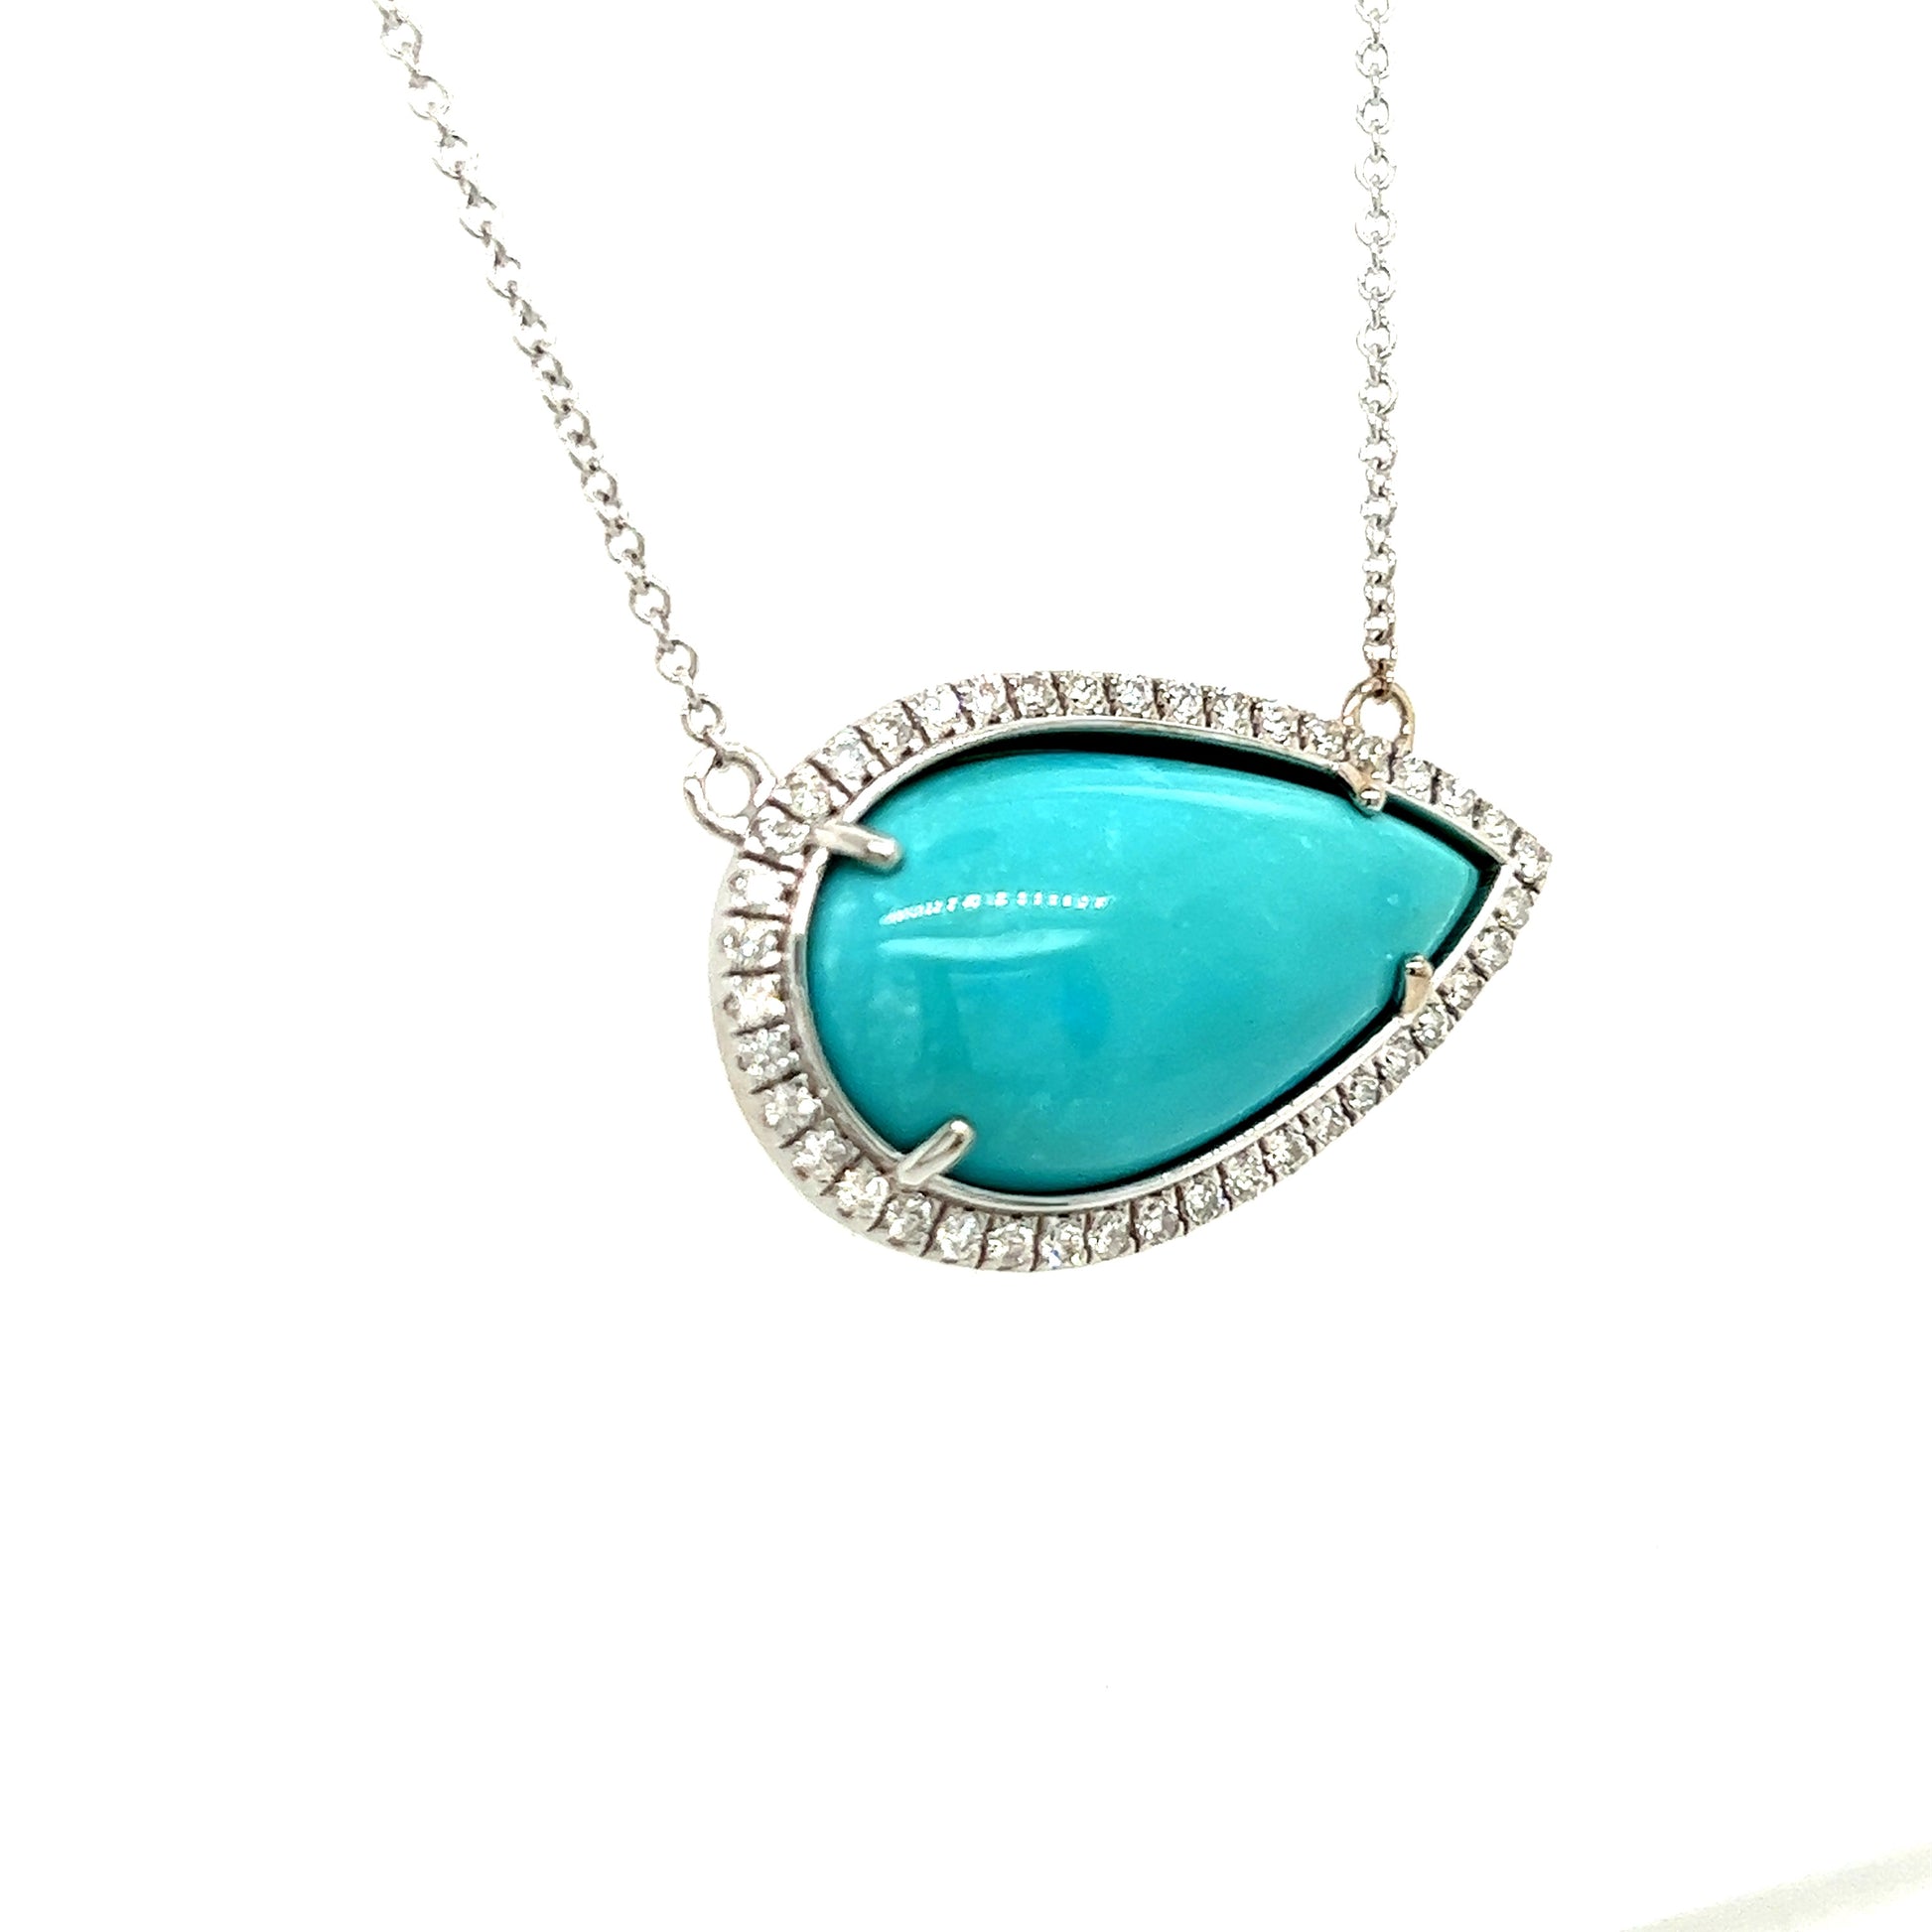 Persian Turquoise Diamond Halo Pendant With Chain 18.5" 14k WG 11.36 TCW Certified $5,950 300680